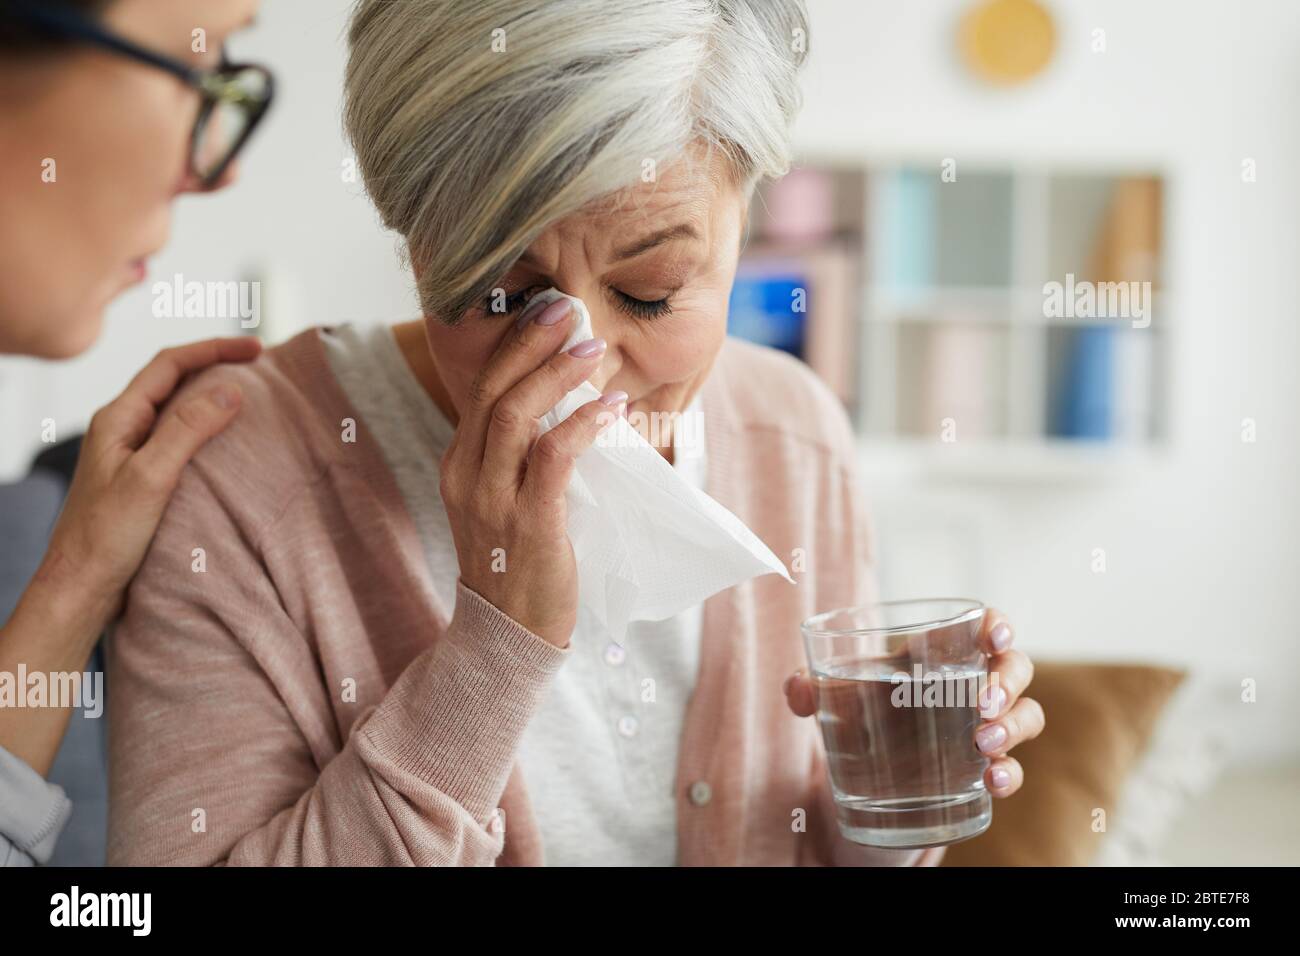 Close up portrait of elegant senior woman crying during therapy session and holding glass of water with female psychologist comforting her Stock Photo